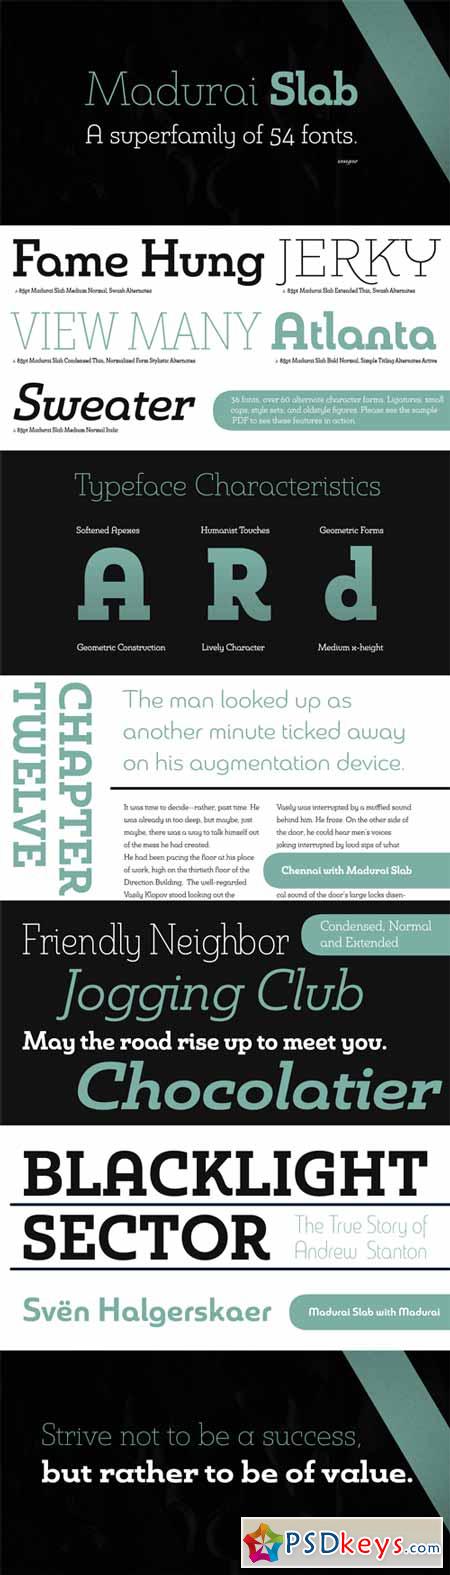 Madurai Slab Font Family - 54 Fonts for $124